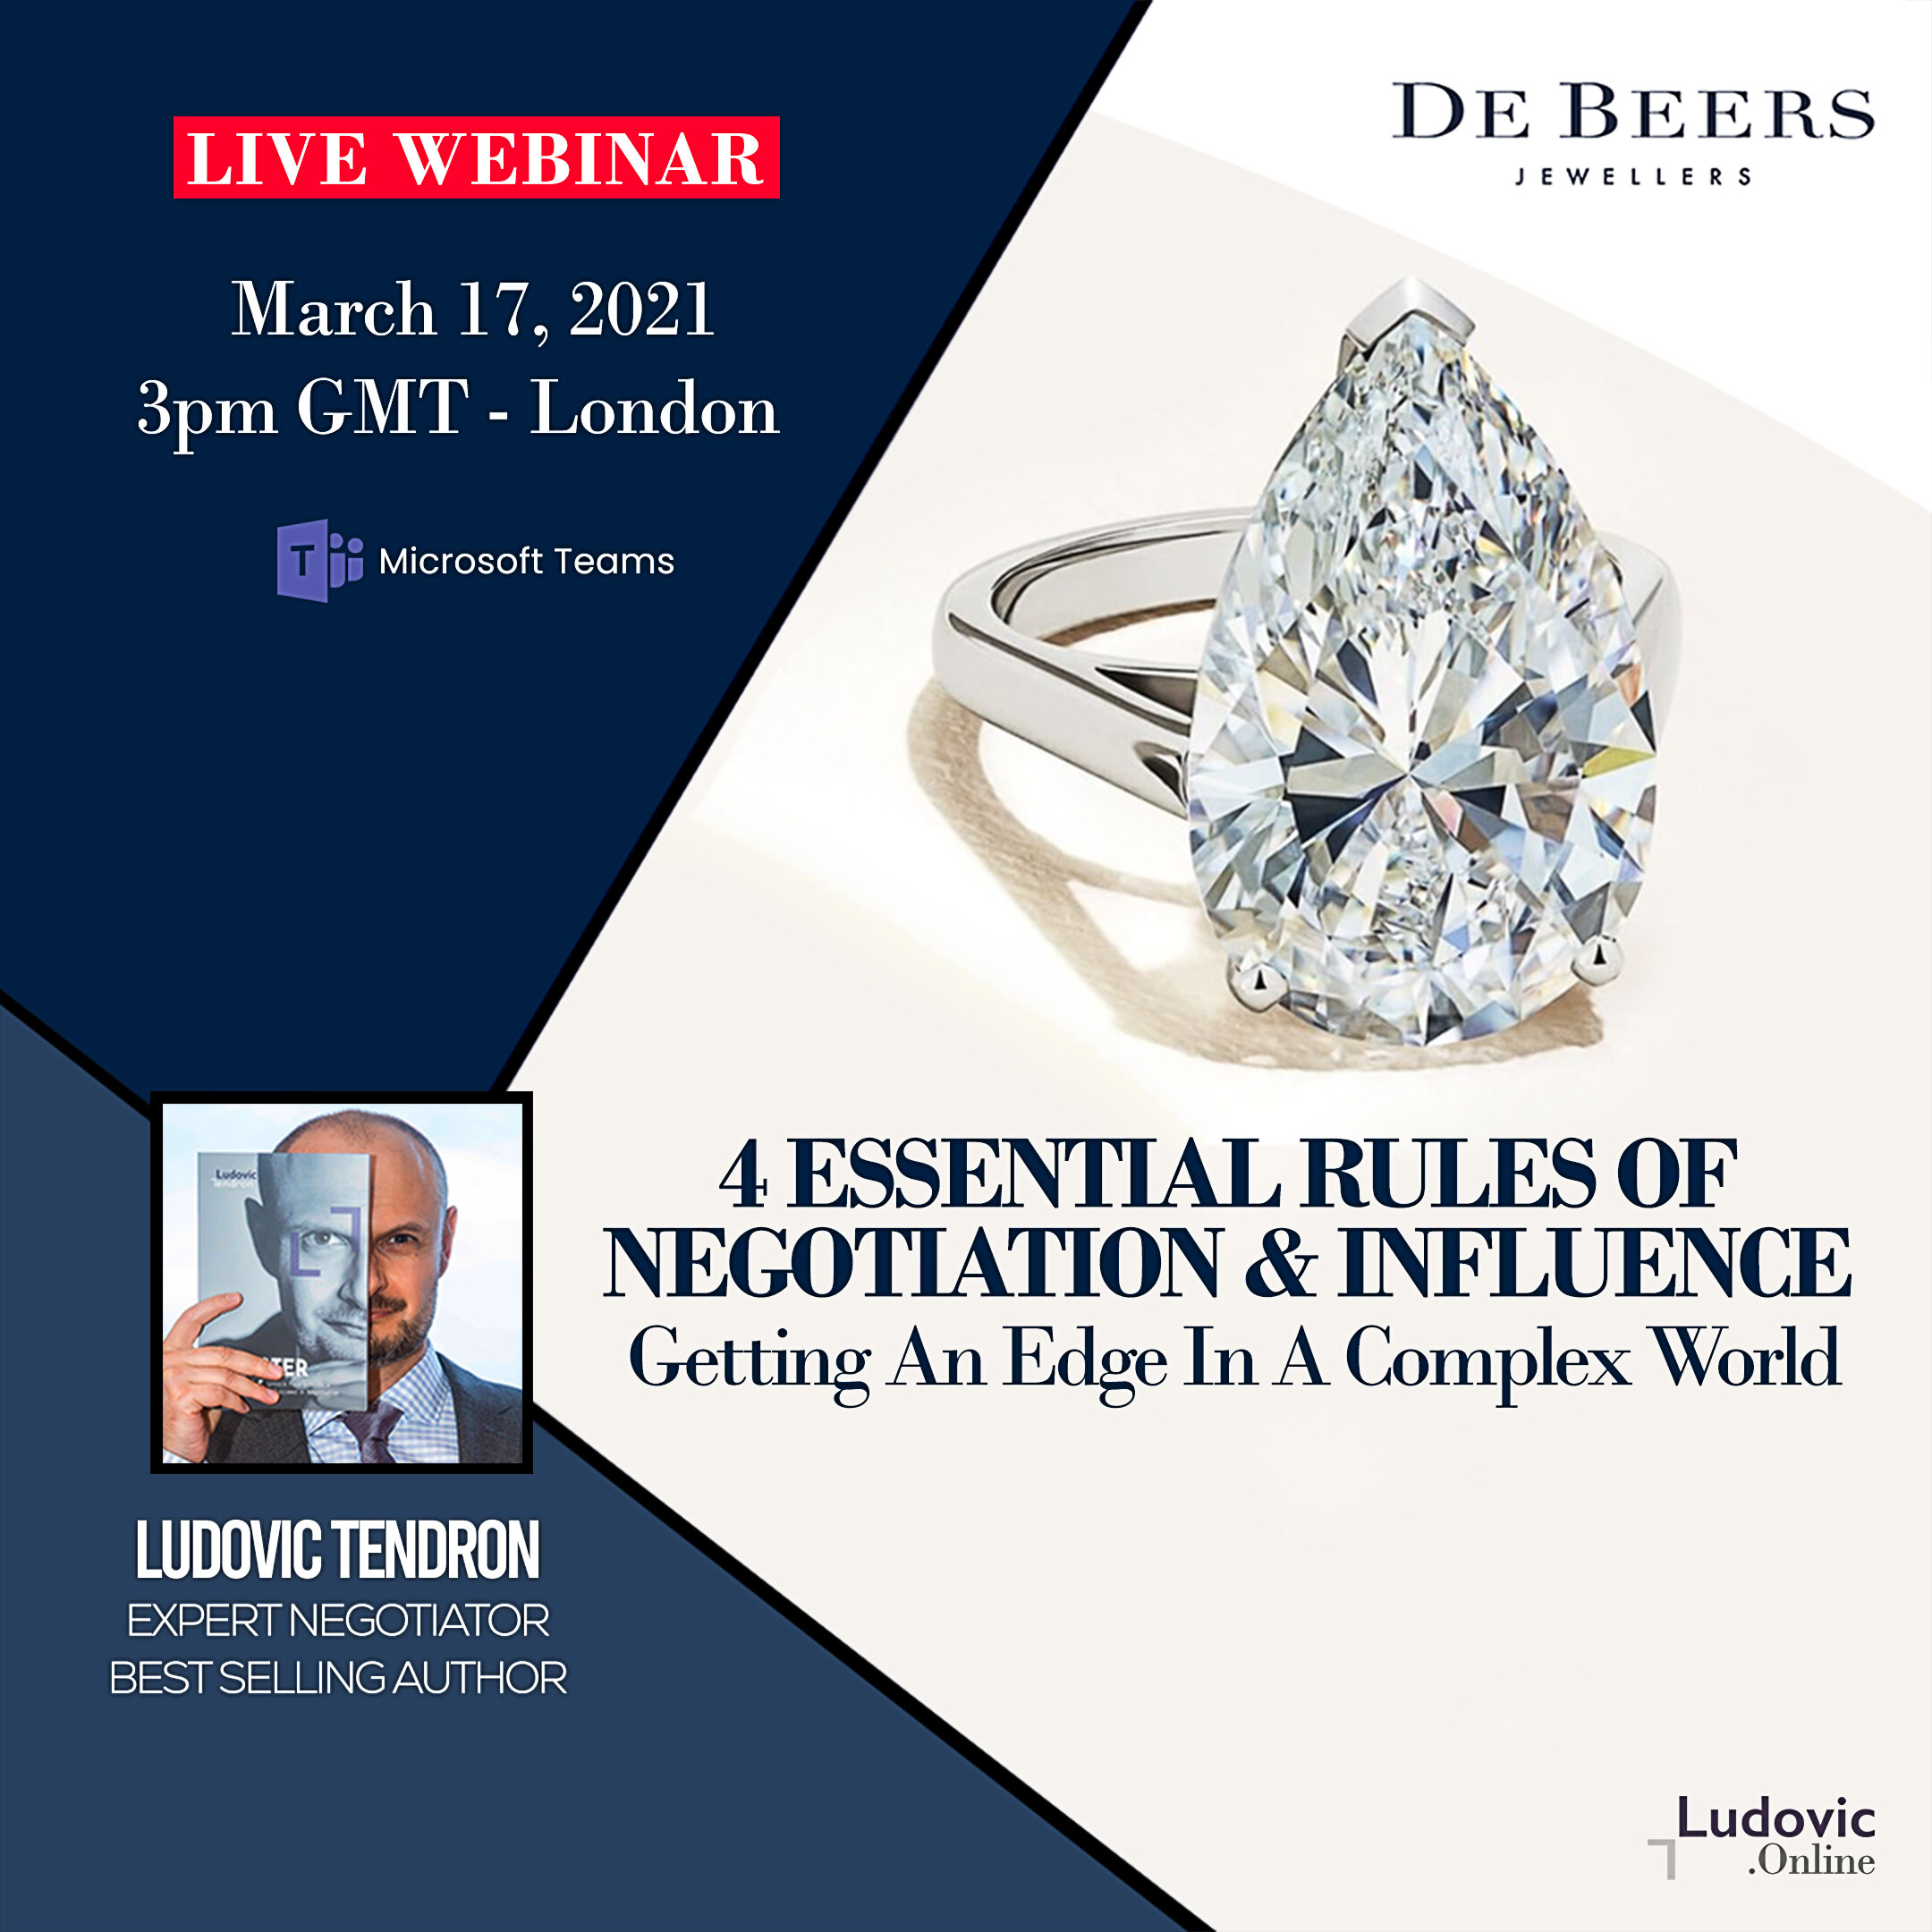 Training on Negotiation &amp; Influence for De Beers